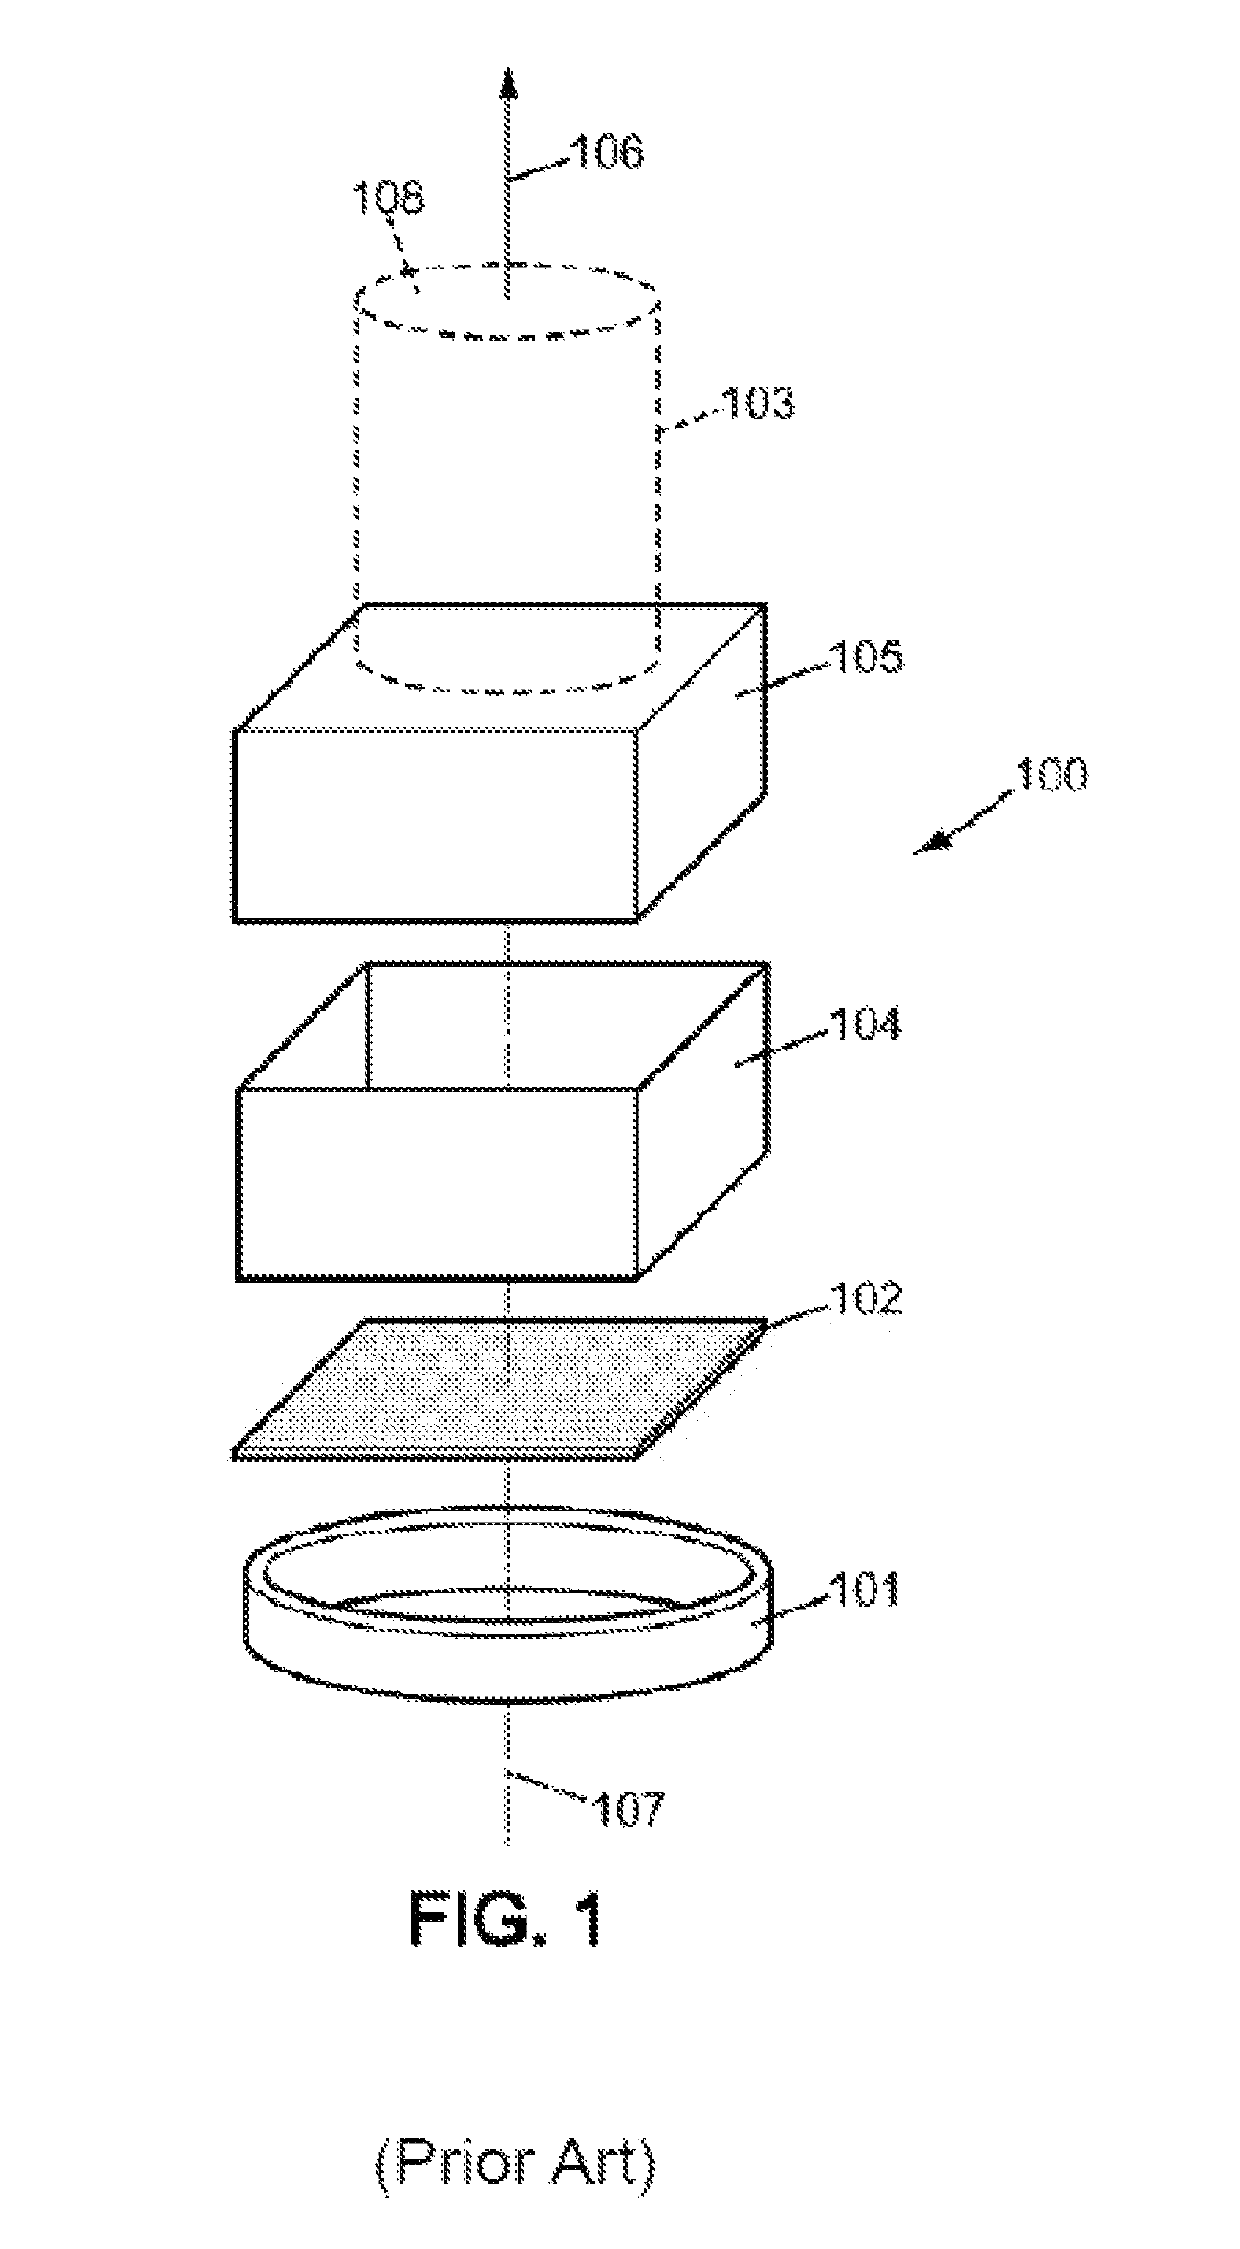 Satellite comprising an optical photography instrument